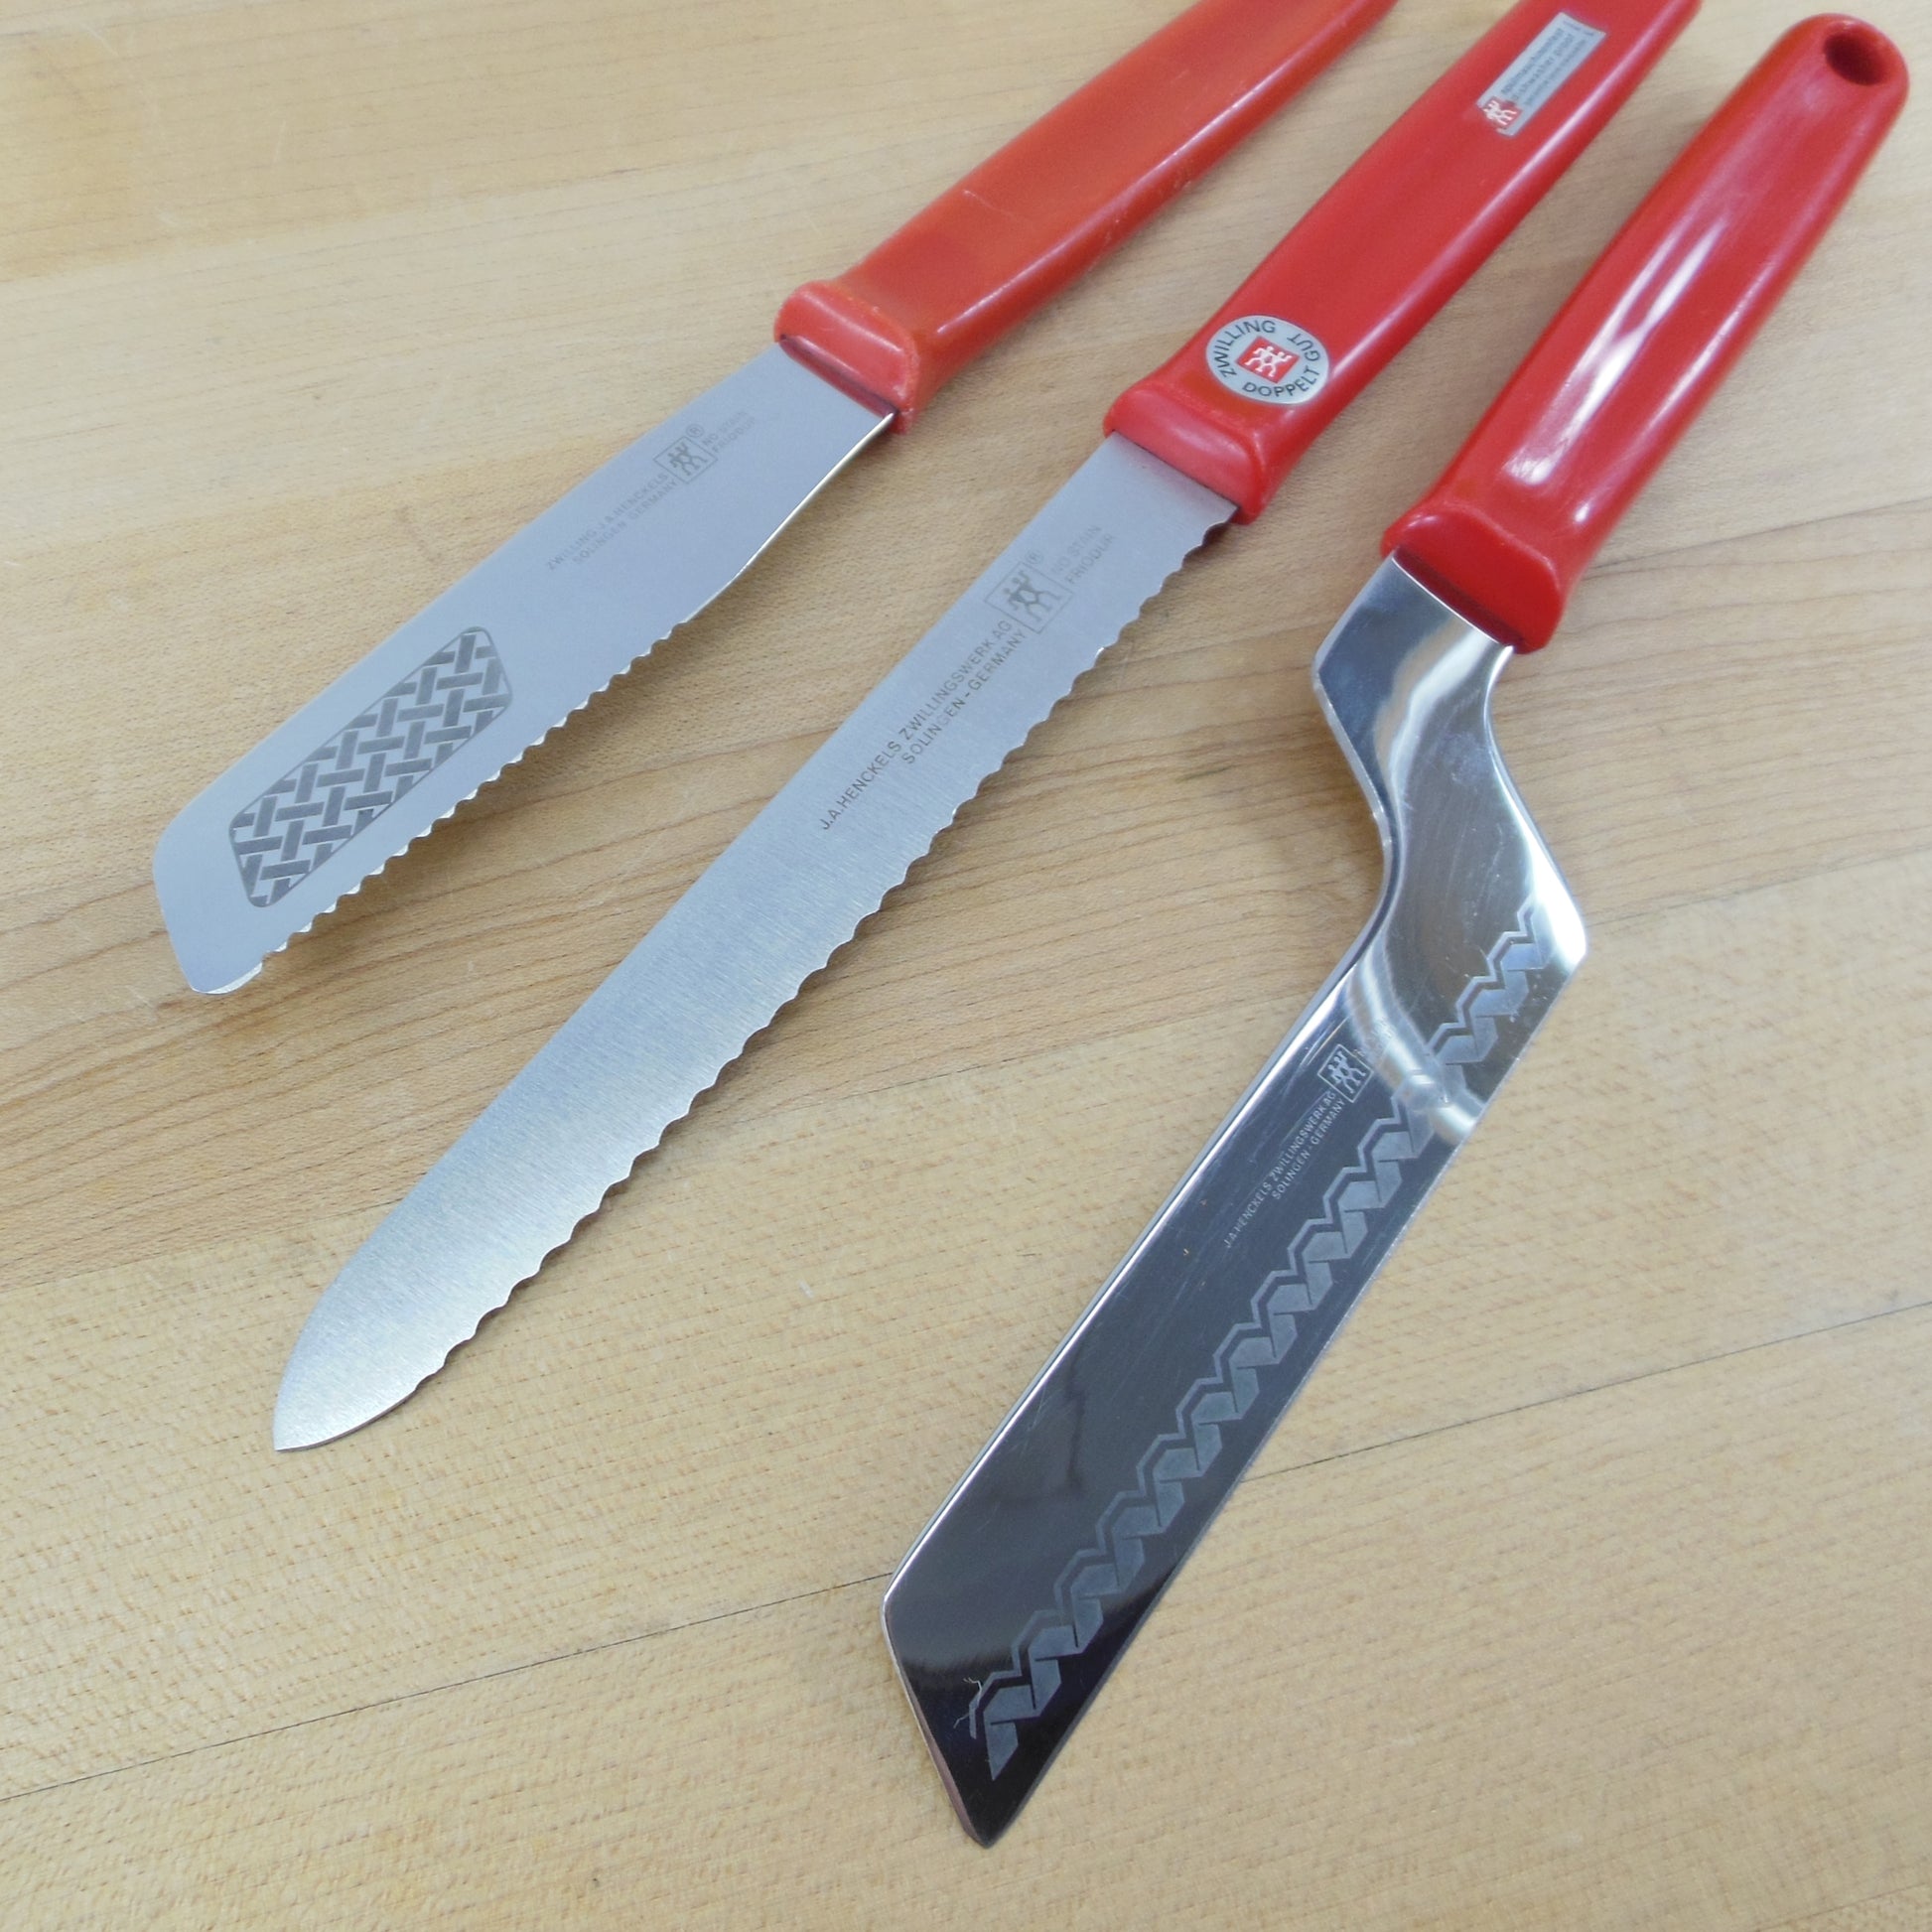 The Kosher Cook, 3 Inch German Steel Paring Knives - Red (2 Pack